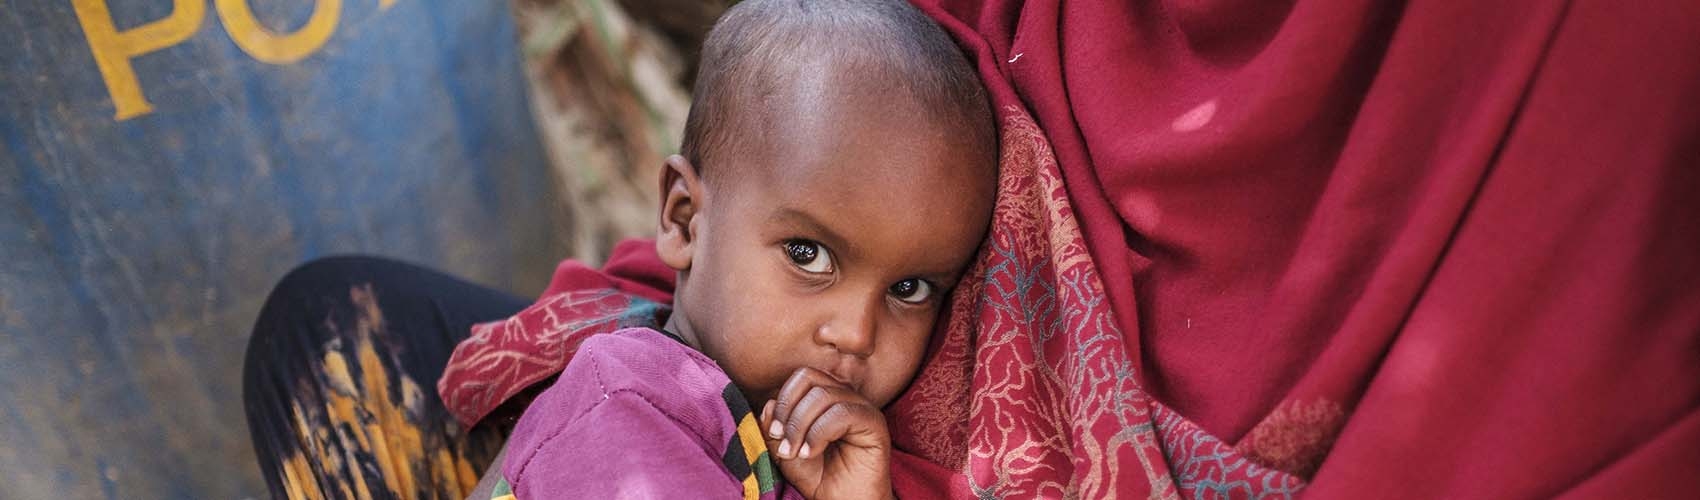 A five-month old baby boy rests on his mother's lap while receiving treatment in Ethiopia for malnutrition.